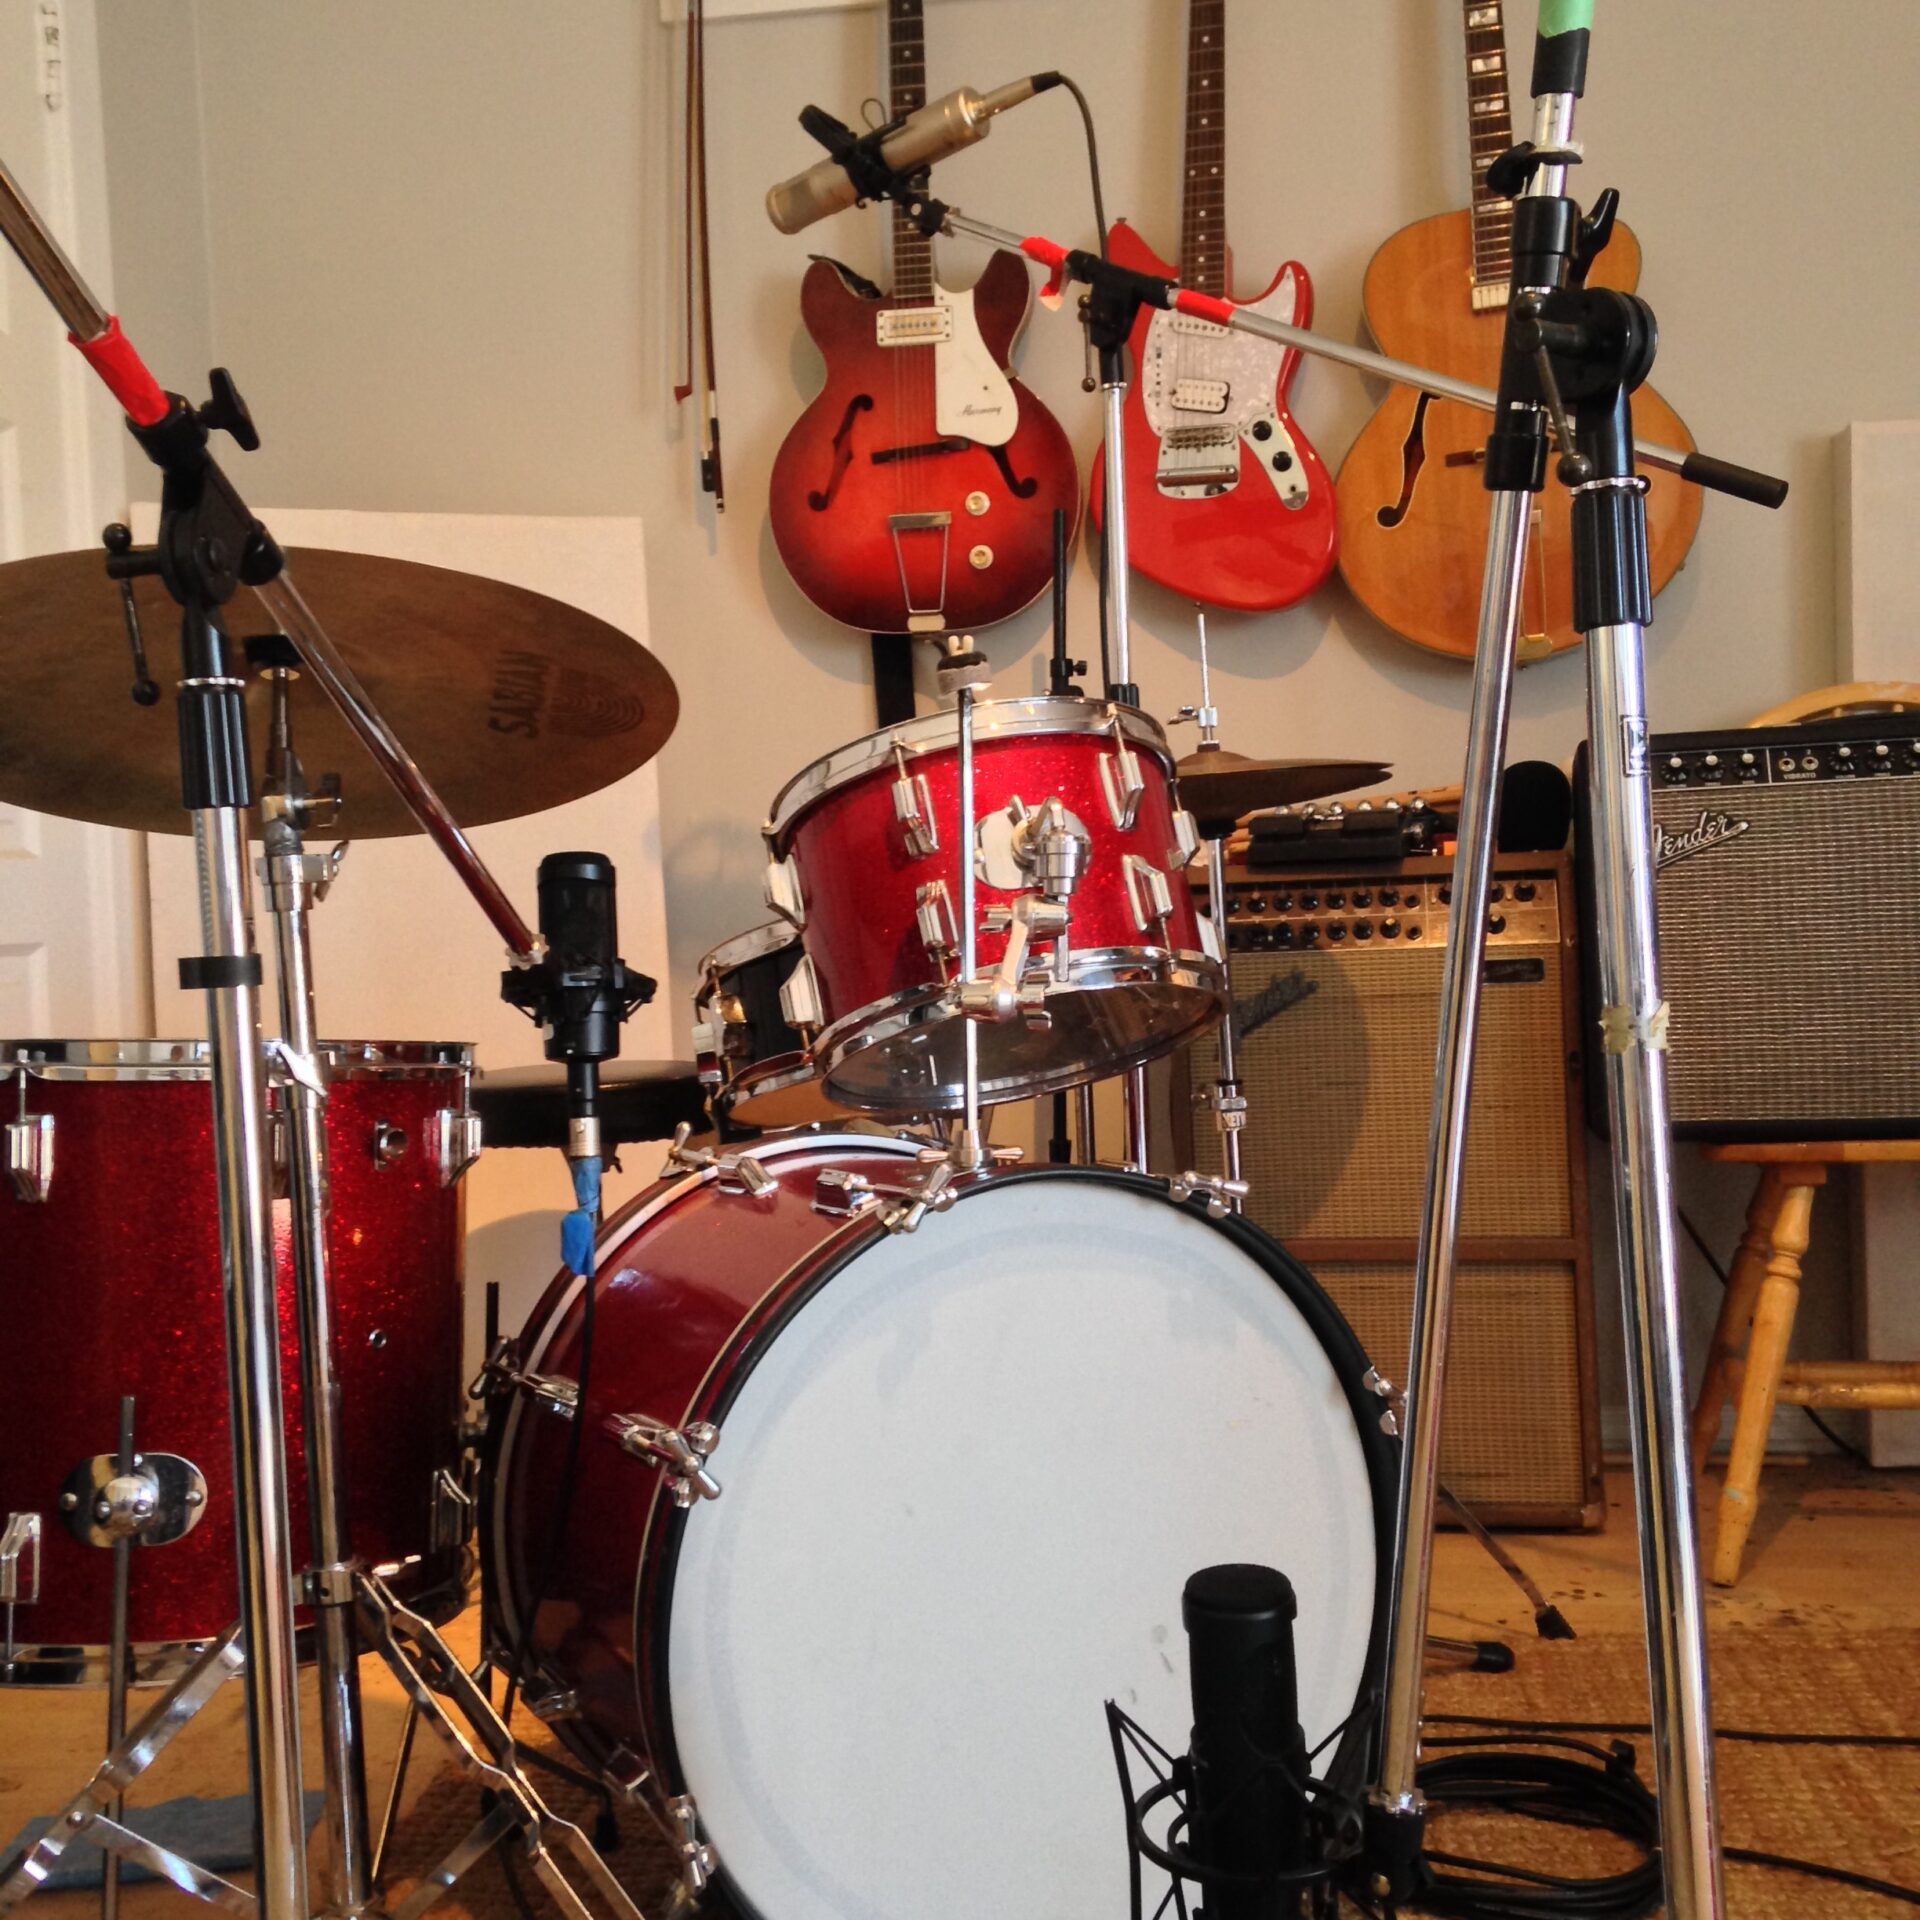 How to Mic a Drum Kit for Recording